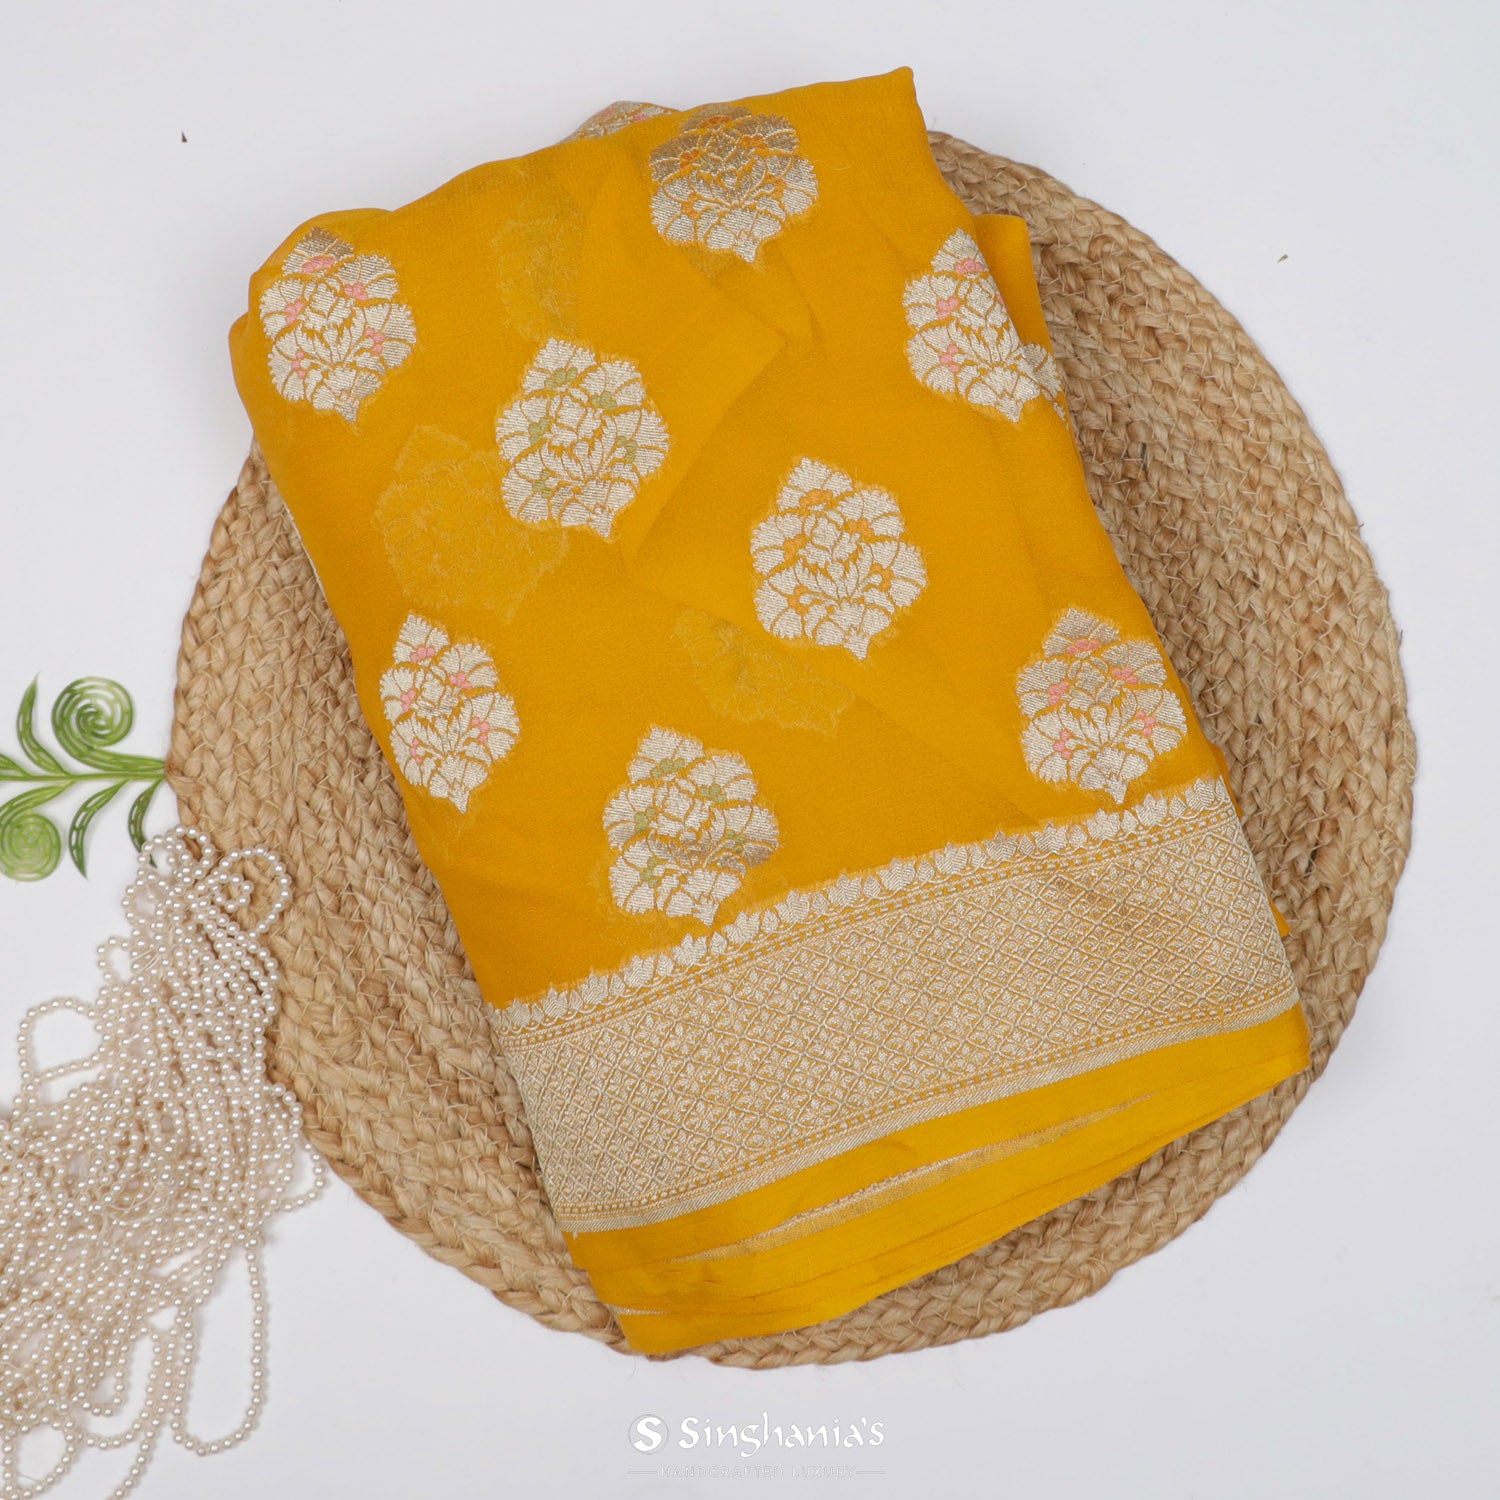 Tuscany Yellow Georgette Saree With Floral Buttas In Banarasi Weaving